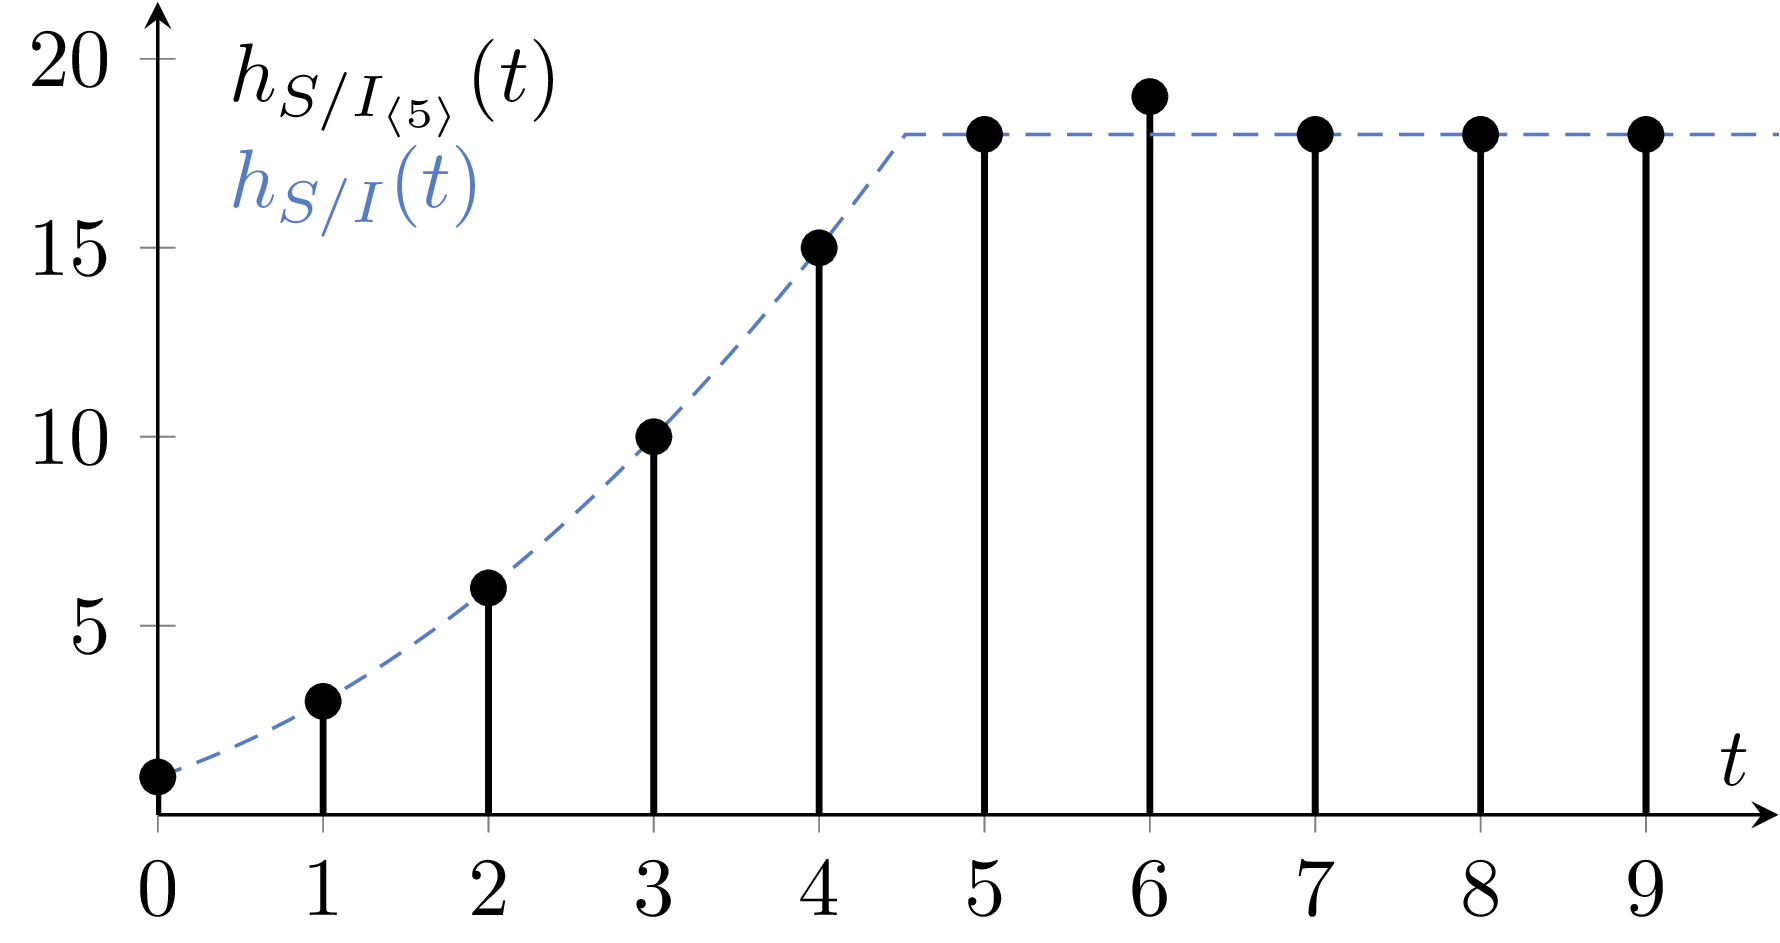 The Hilbert functions of the ideal of 18 general points in the plane, and of the chopped ideal in degree 5. These functions agree except in degree 6 where the missing sextic lives.